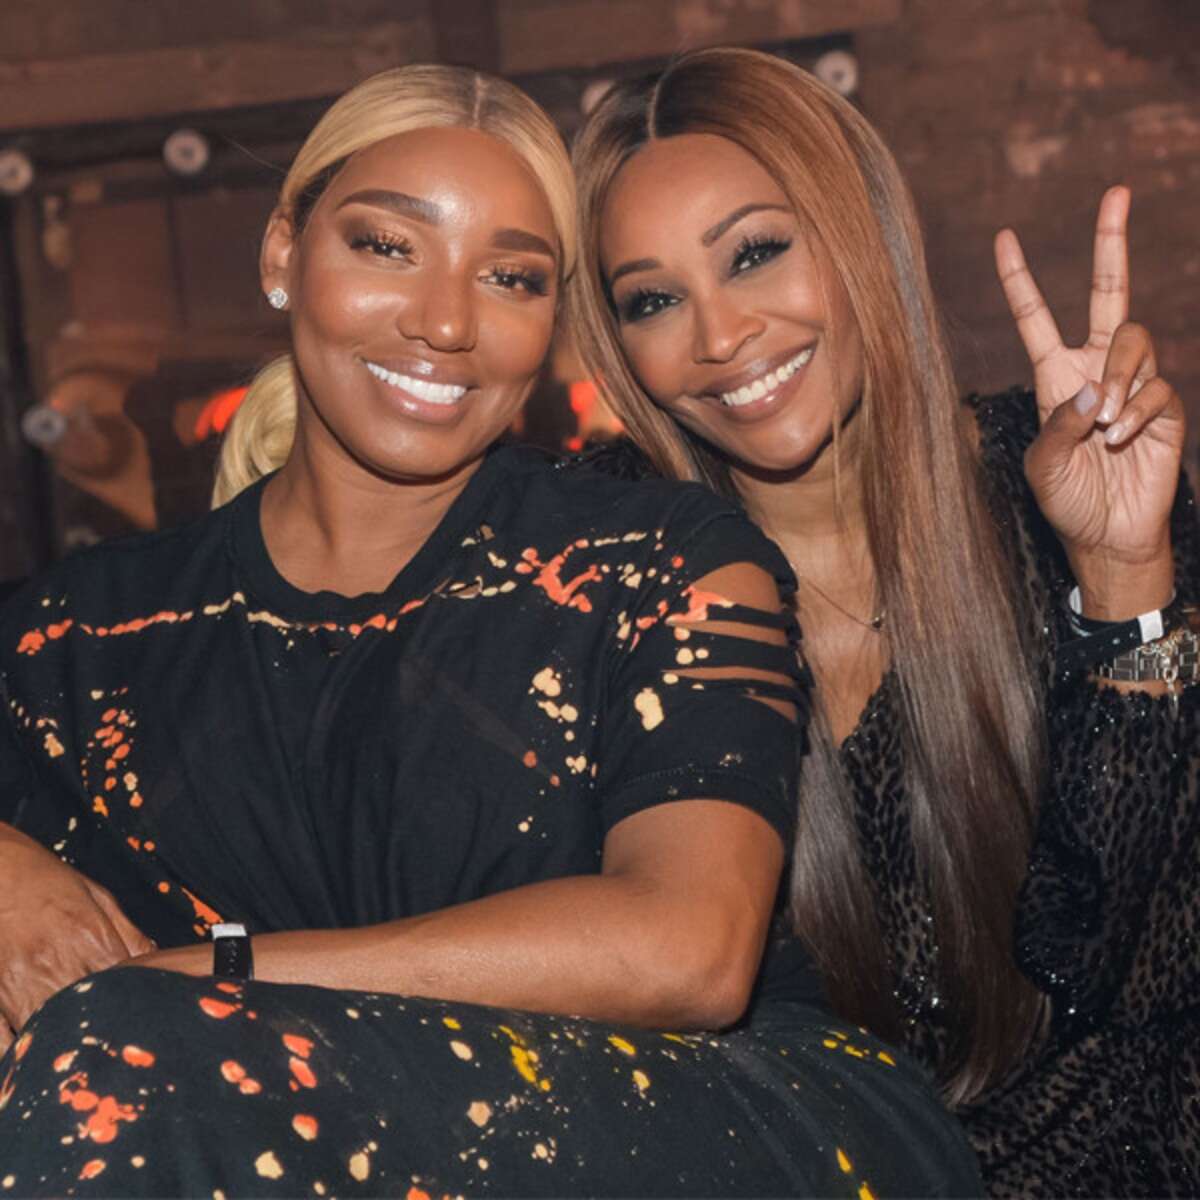 NeNe Leakes's Fans Support Her After She Shares A Few Words About Cynthia Bailey - Watch The Video